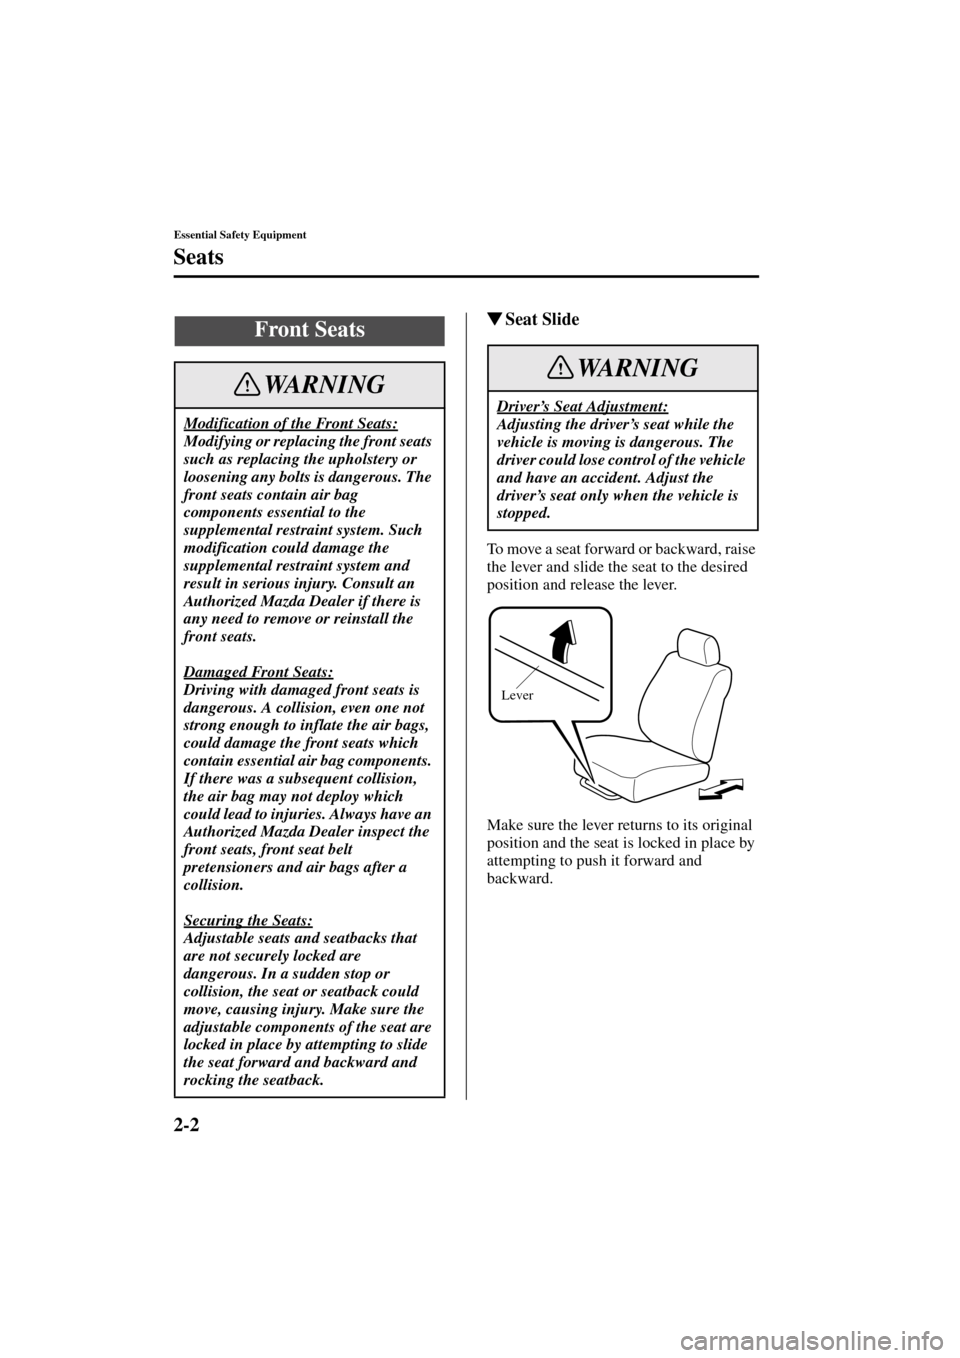 MAZDA MODEL 3 HATCHBACK 2004   (in English) User Guide 2-2
Essential Safety Equipment
Form No. 8S18-EA-03I
Seats
Seat Slide
To move a seat forward or backward, raise 
the lever and slide the seat to the desired 
position and release the lever.
Make sure 